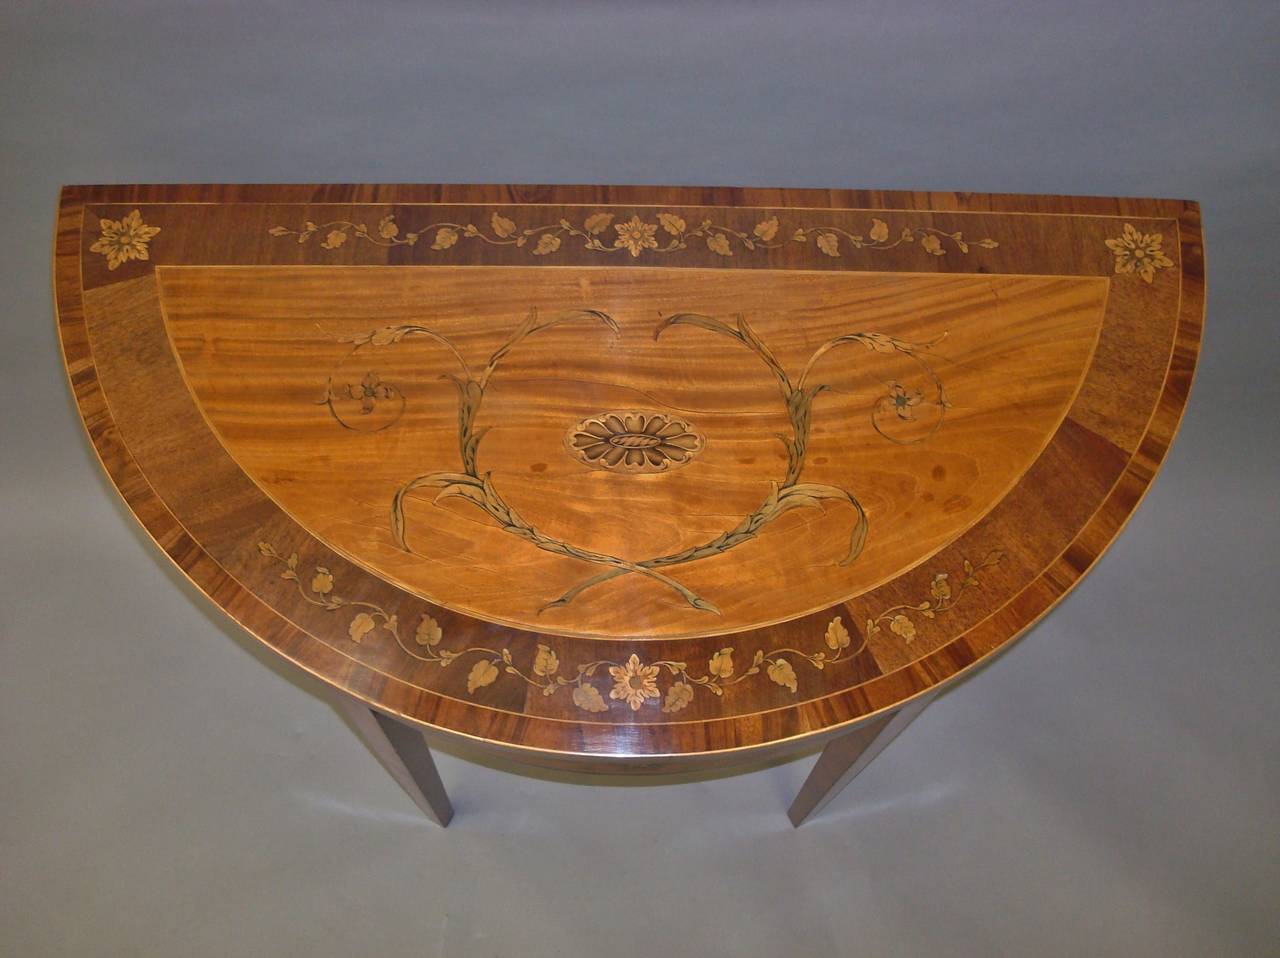 A fine George III satinwood and marquetry demilune card table; the half moon top with a large satinwood panel centred with an oval sycamore paterae surrounded by scrolling foliage; with a wide border having large flower heads with trailing leaves